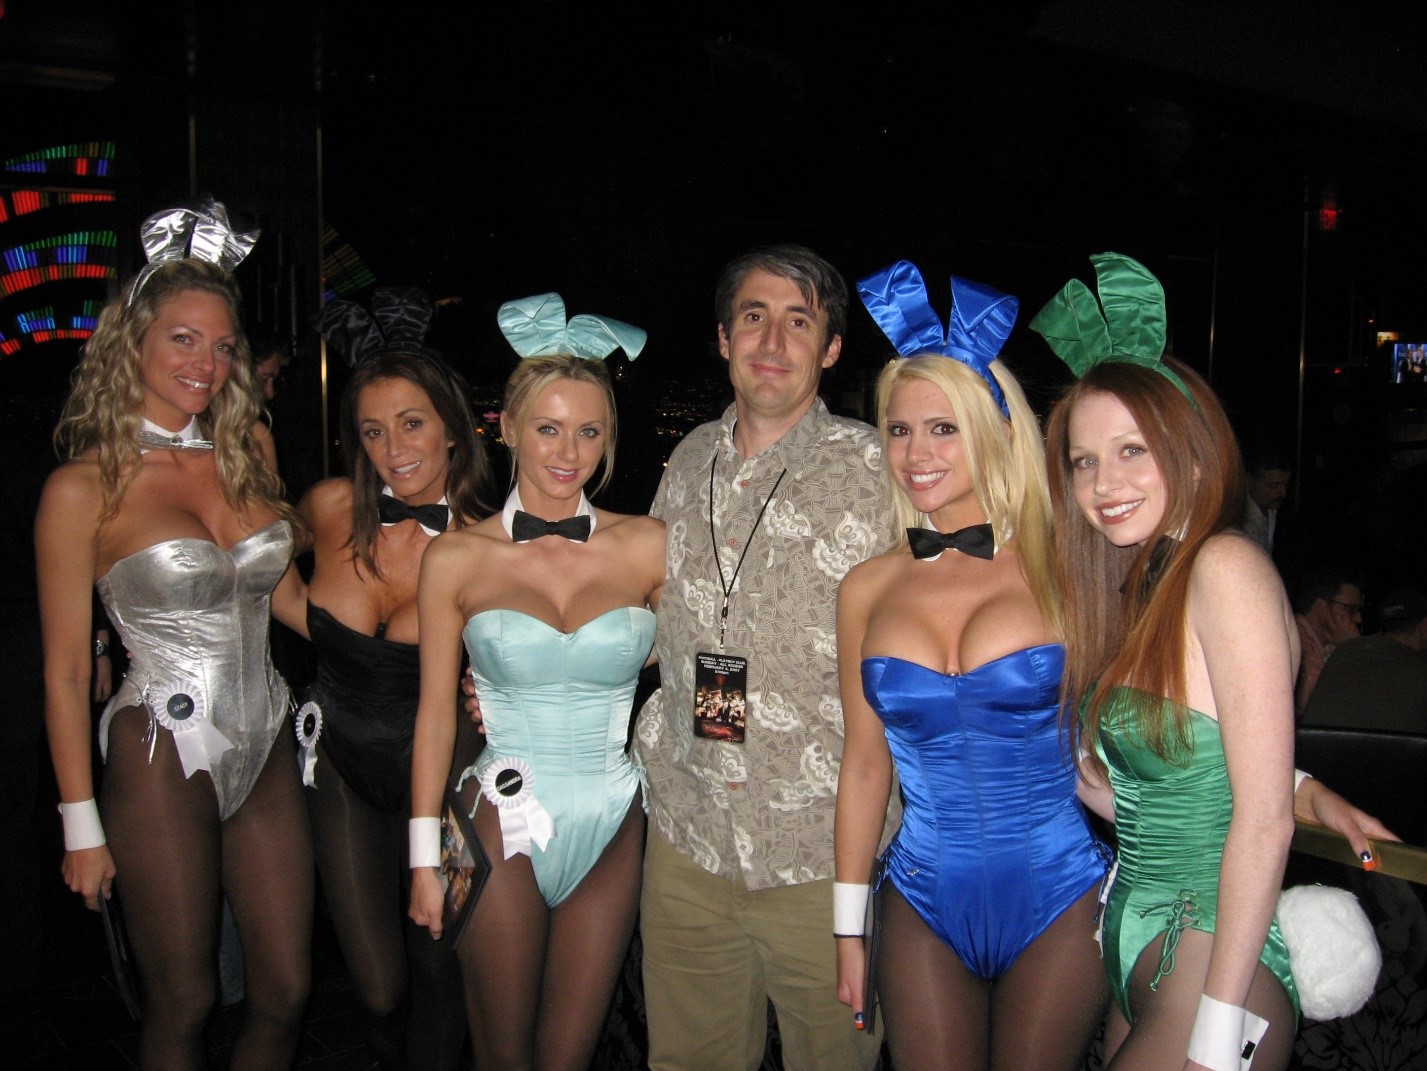 Superbowl party at the old Playboy Club at the Palms